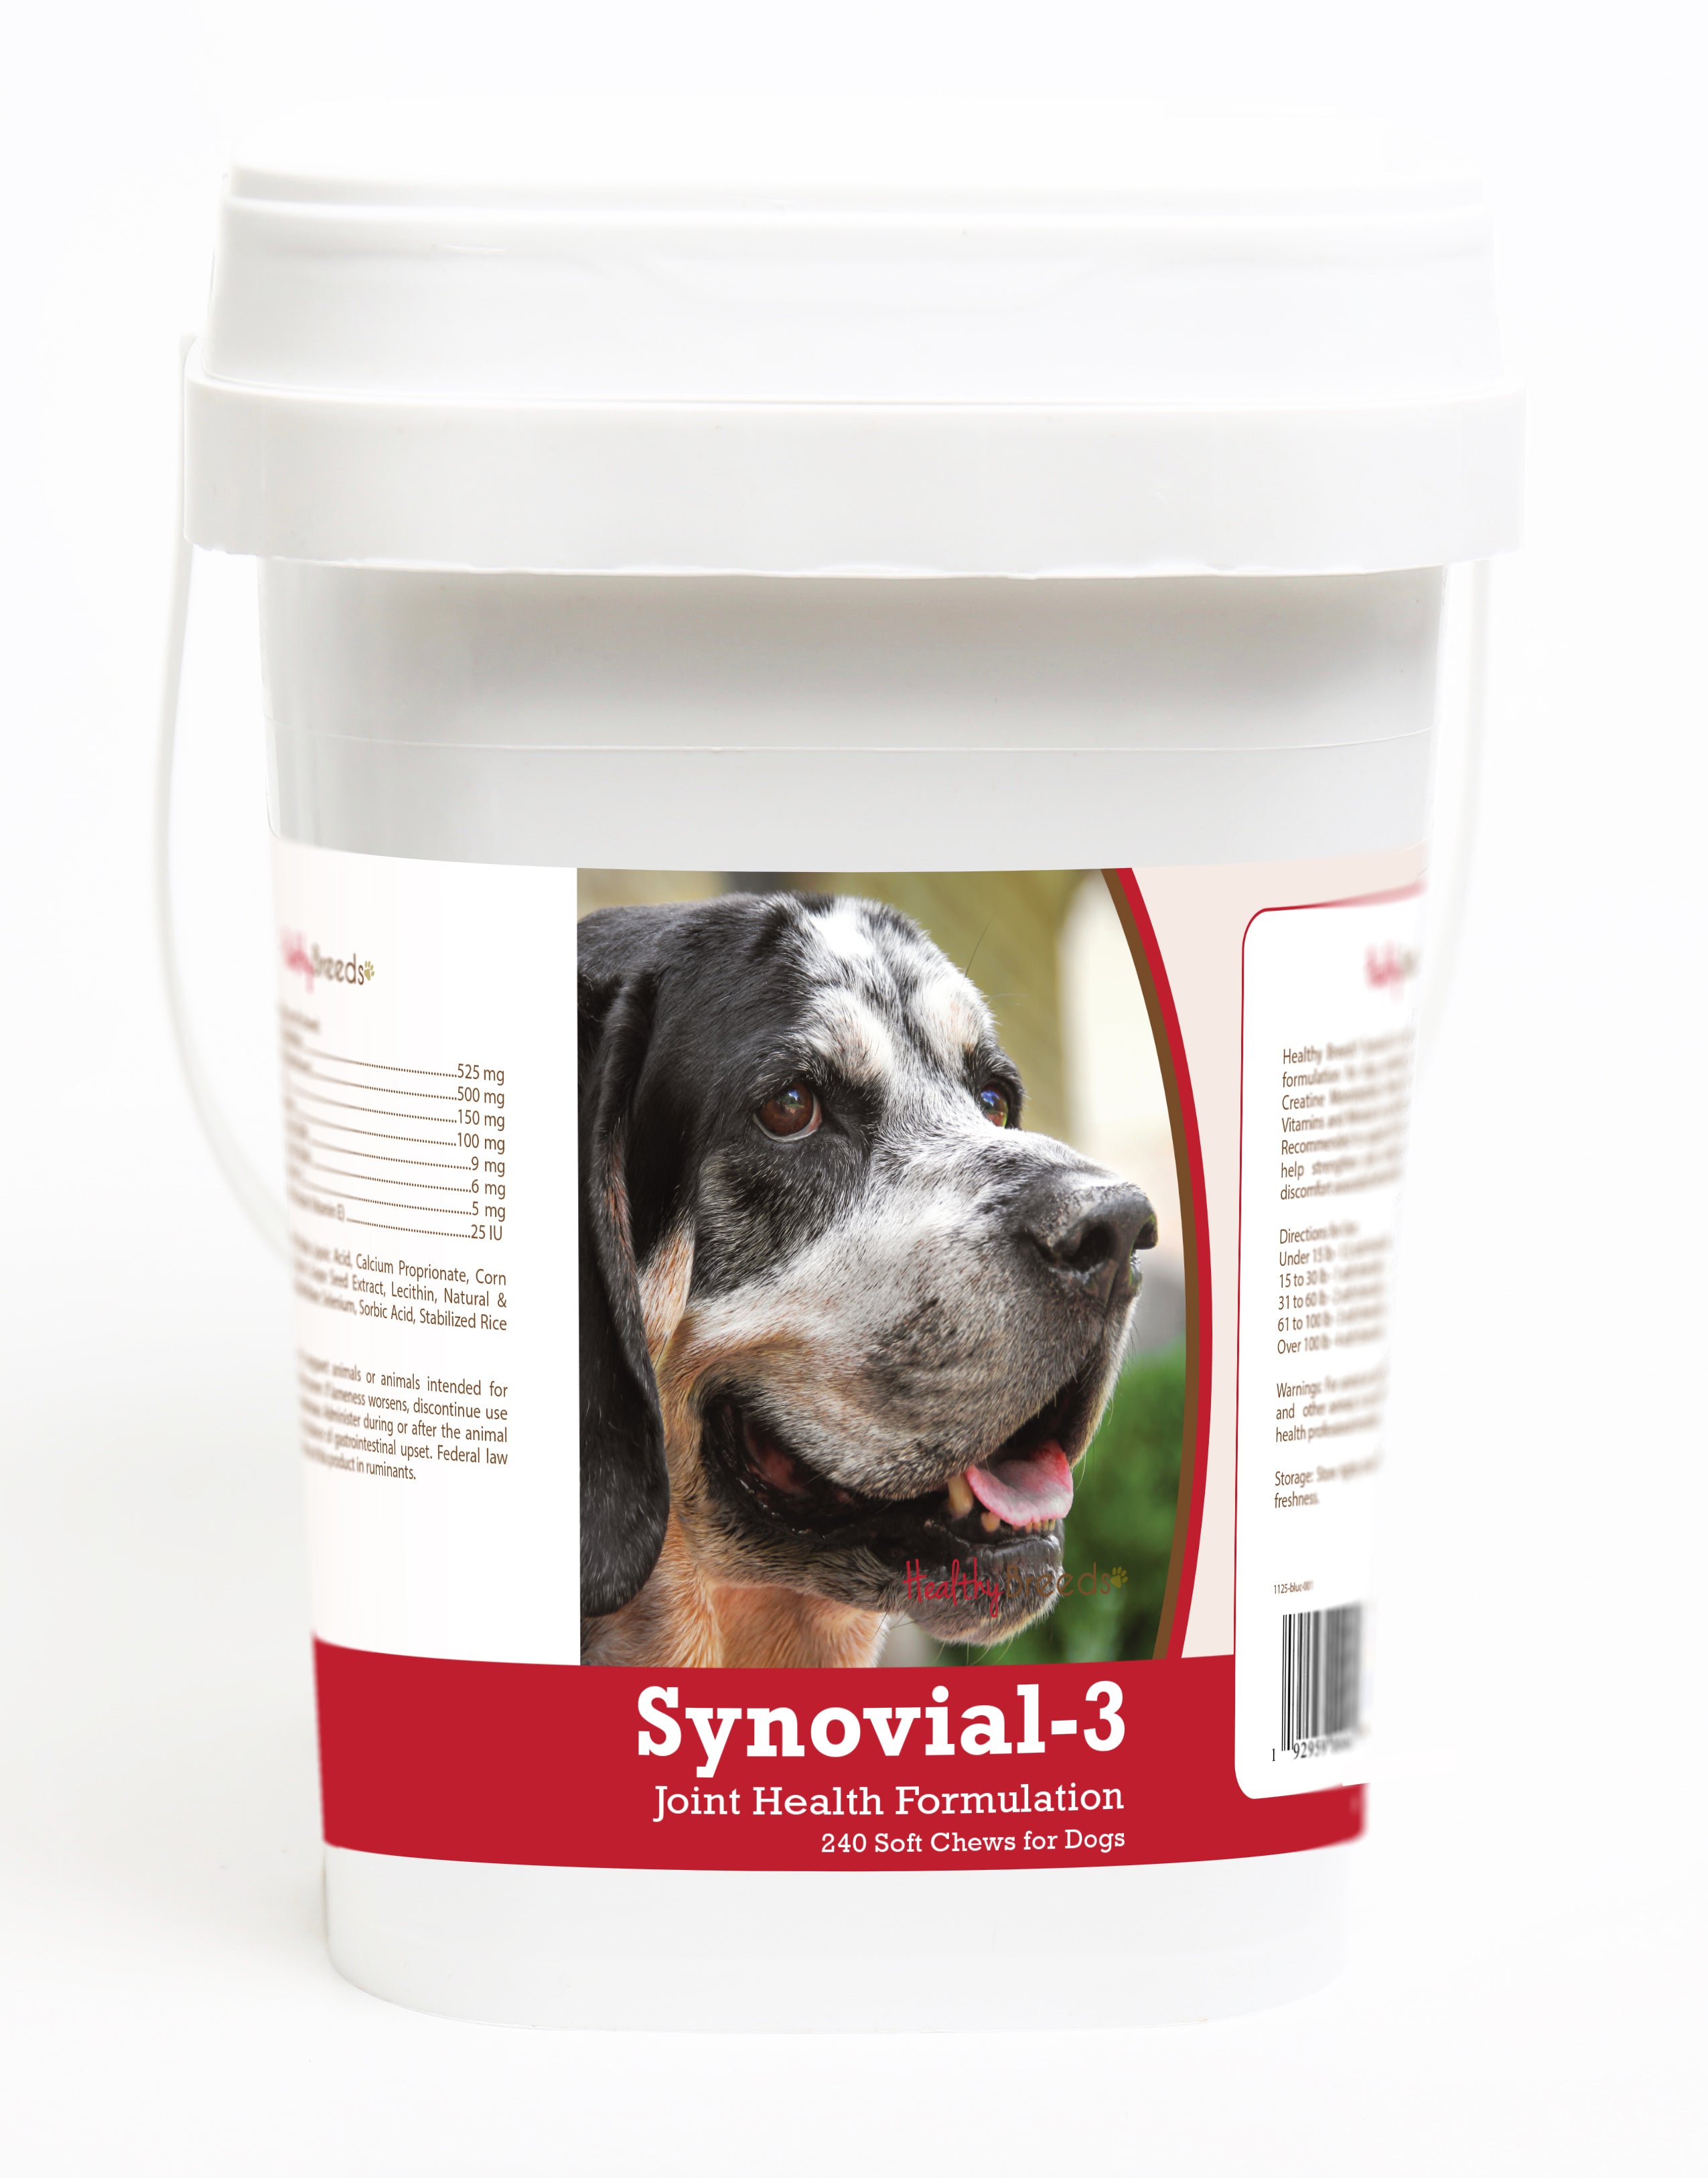 Bluetick Coonhound Synovial-3 Joint Health Formulation Soft Chews 240 Count